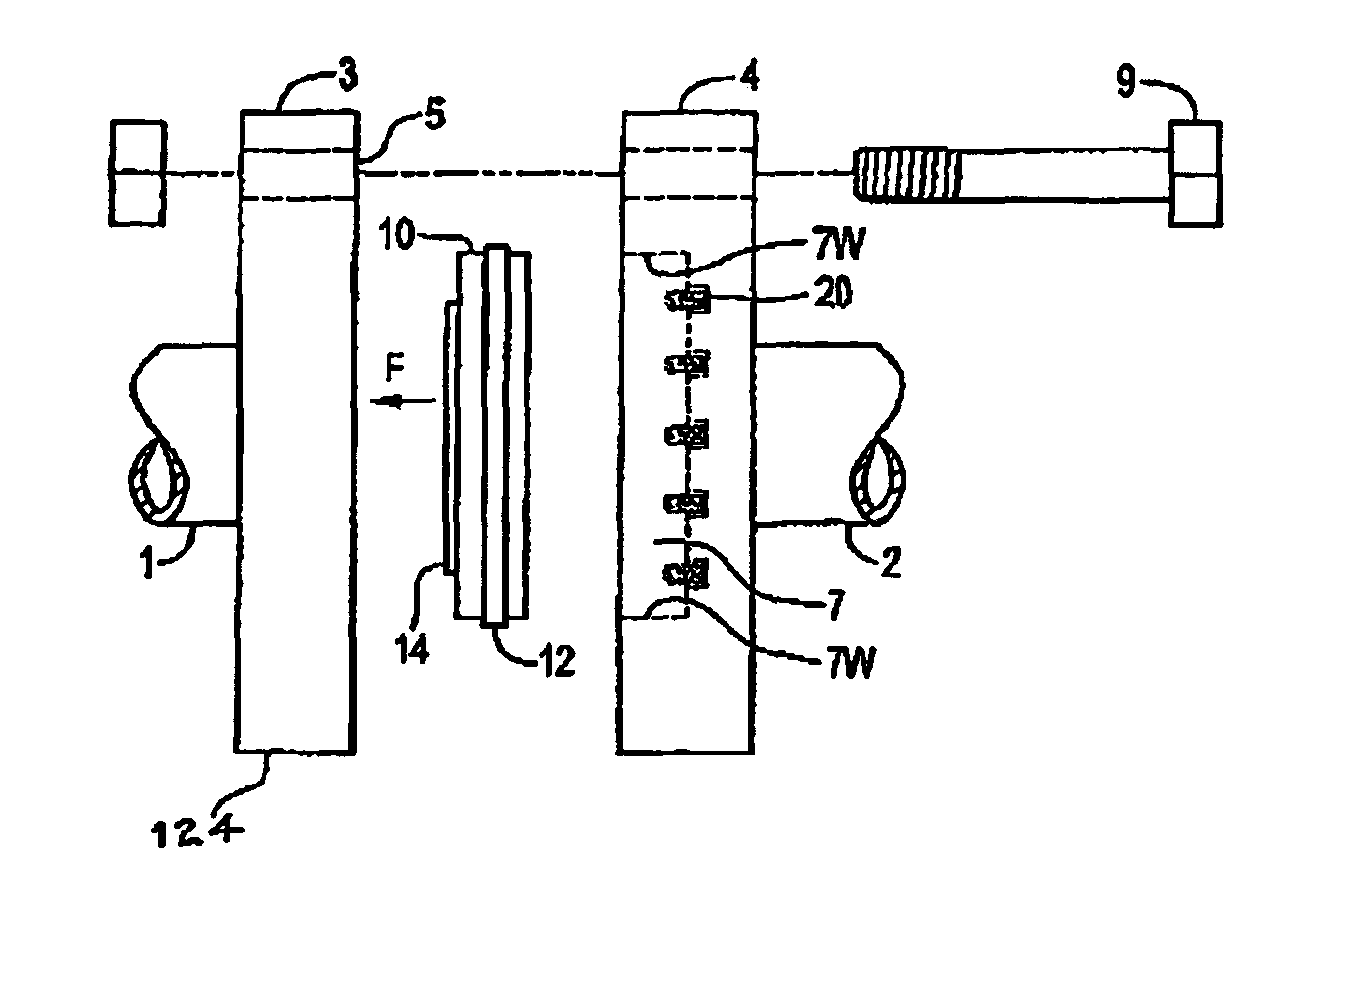 Apparatus for connecting fluid conduits